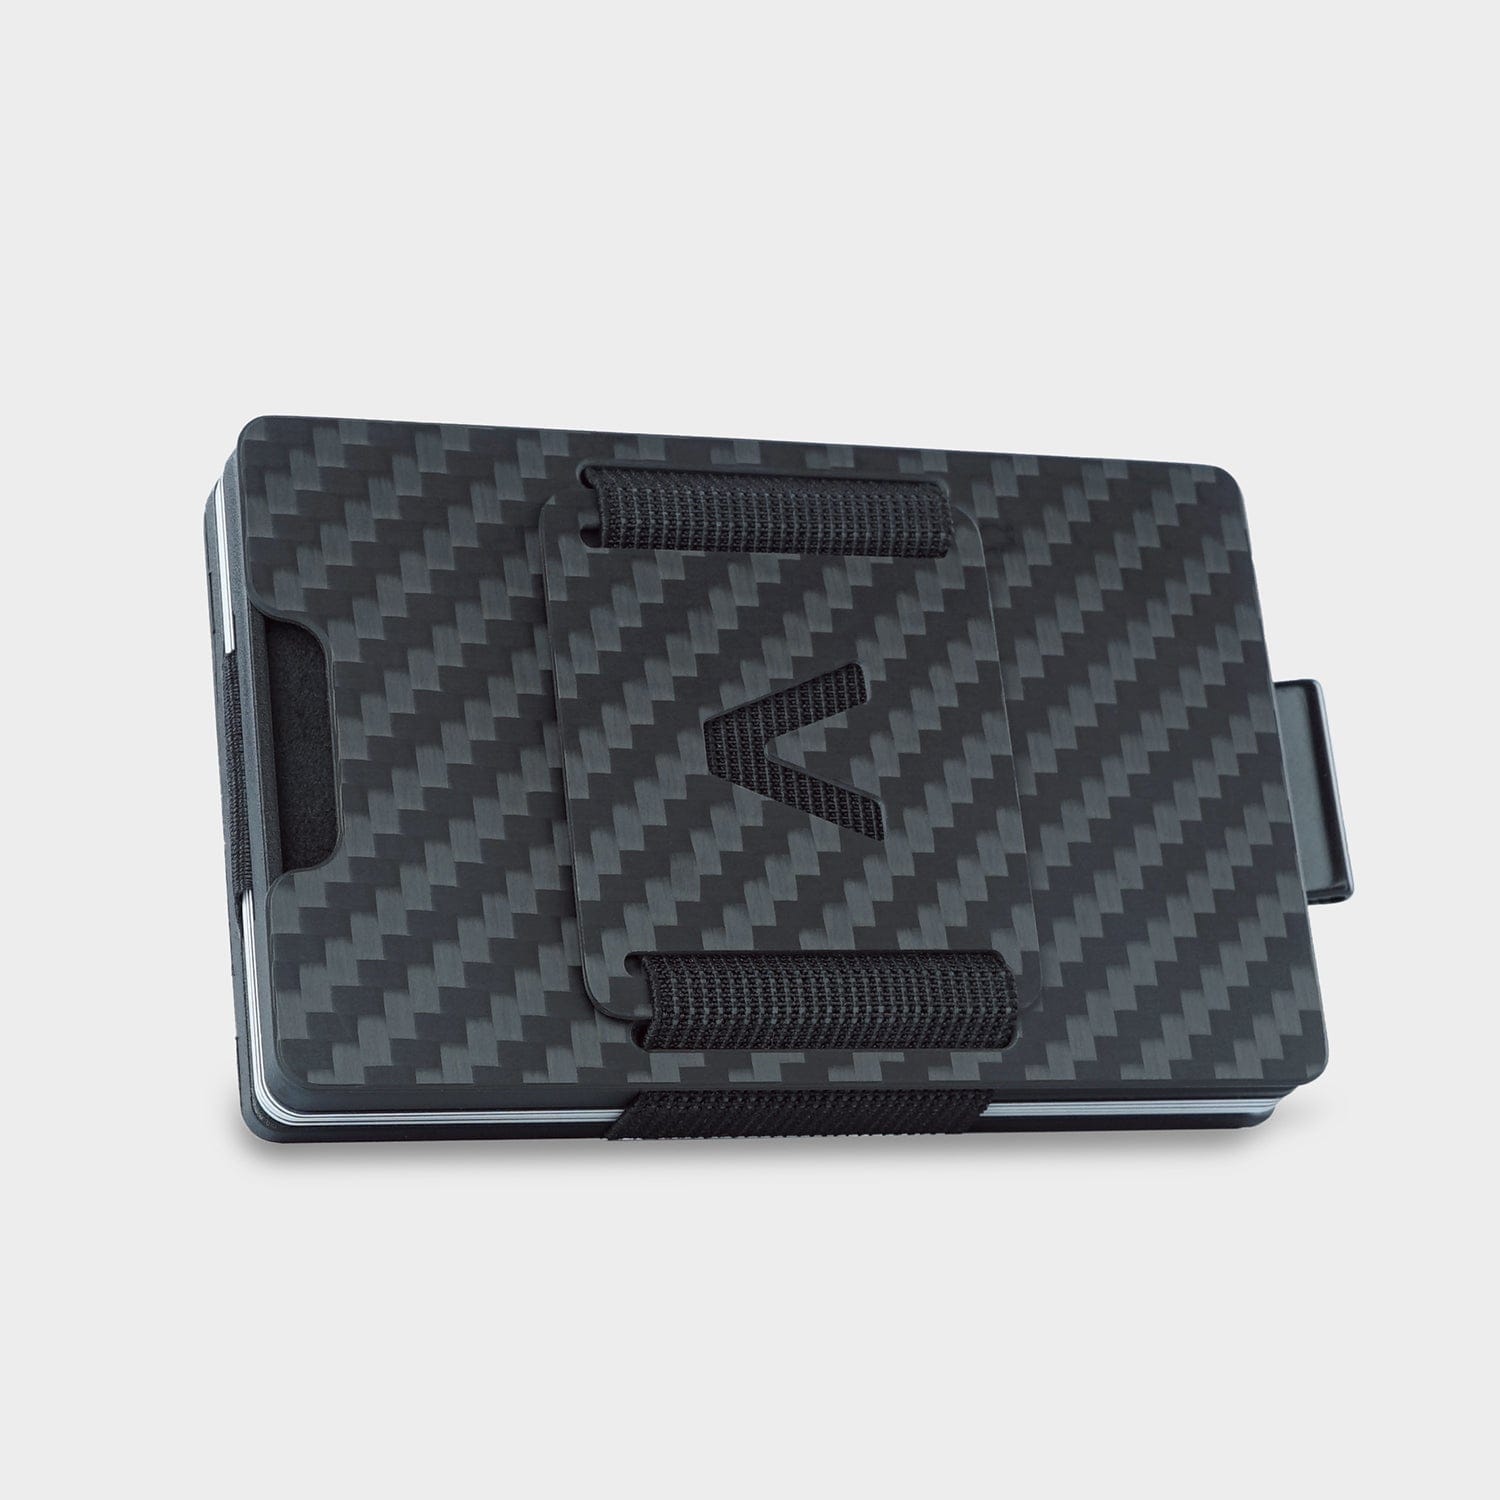 NOT FLAW[LESS] Carbon Slim Wallet